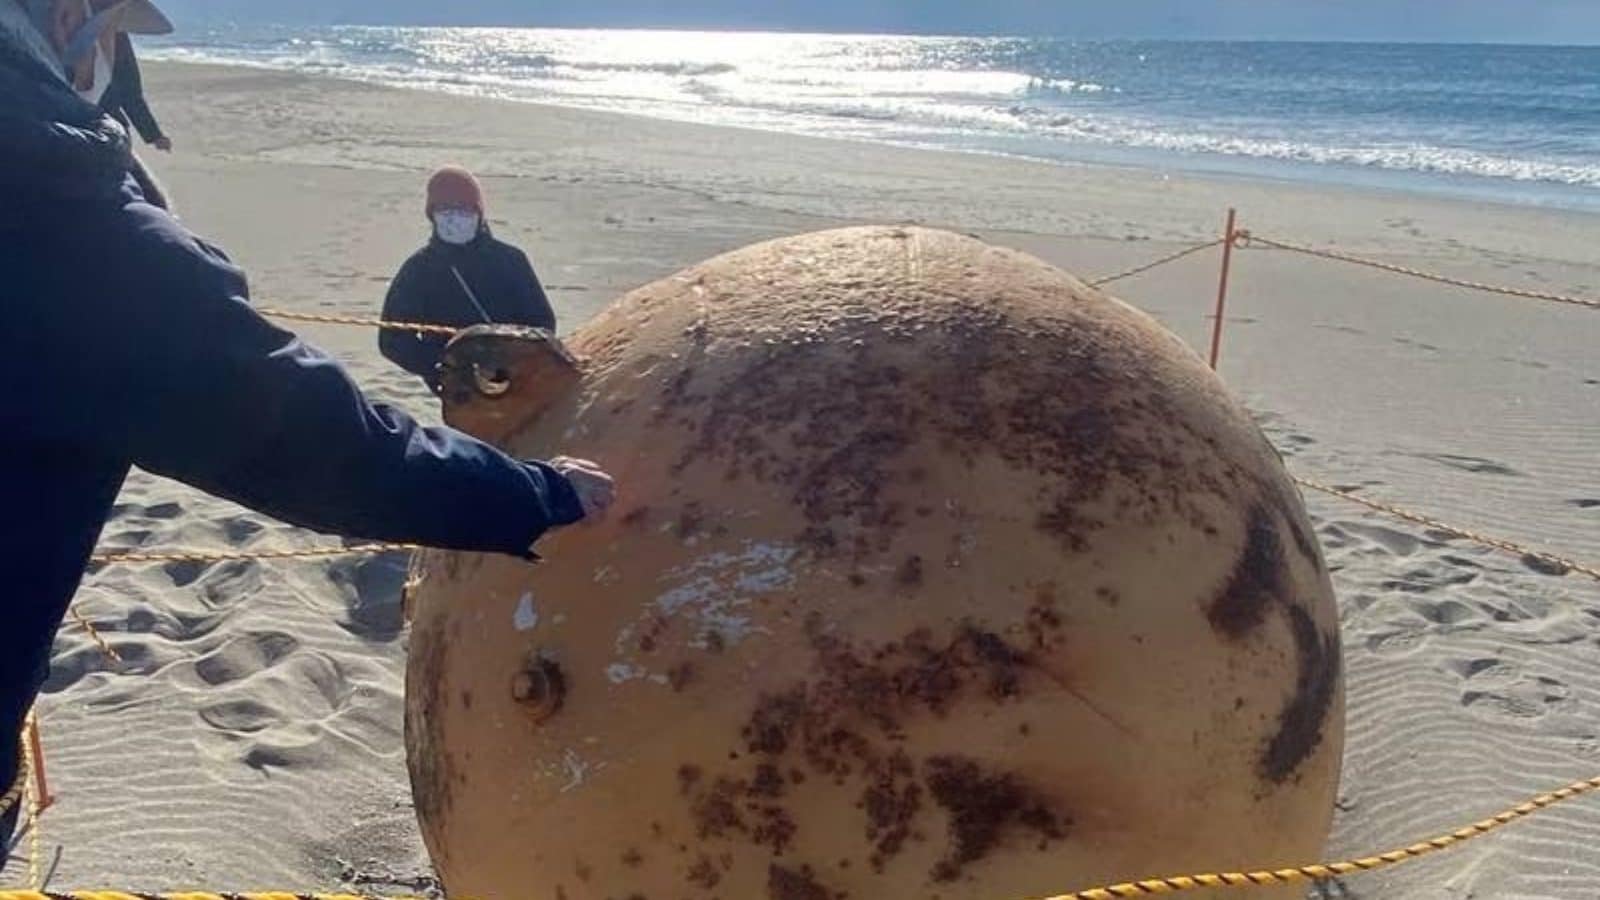 'It's A Buoy': Mystery Behind 'Godzilla Egg' Sized Orb Found at Japanese Beach Solved